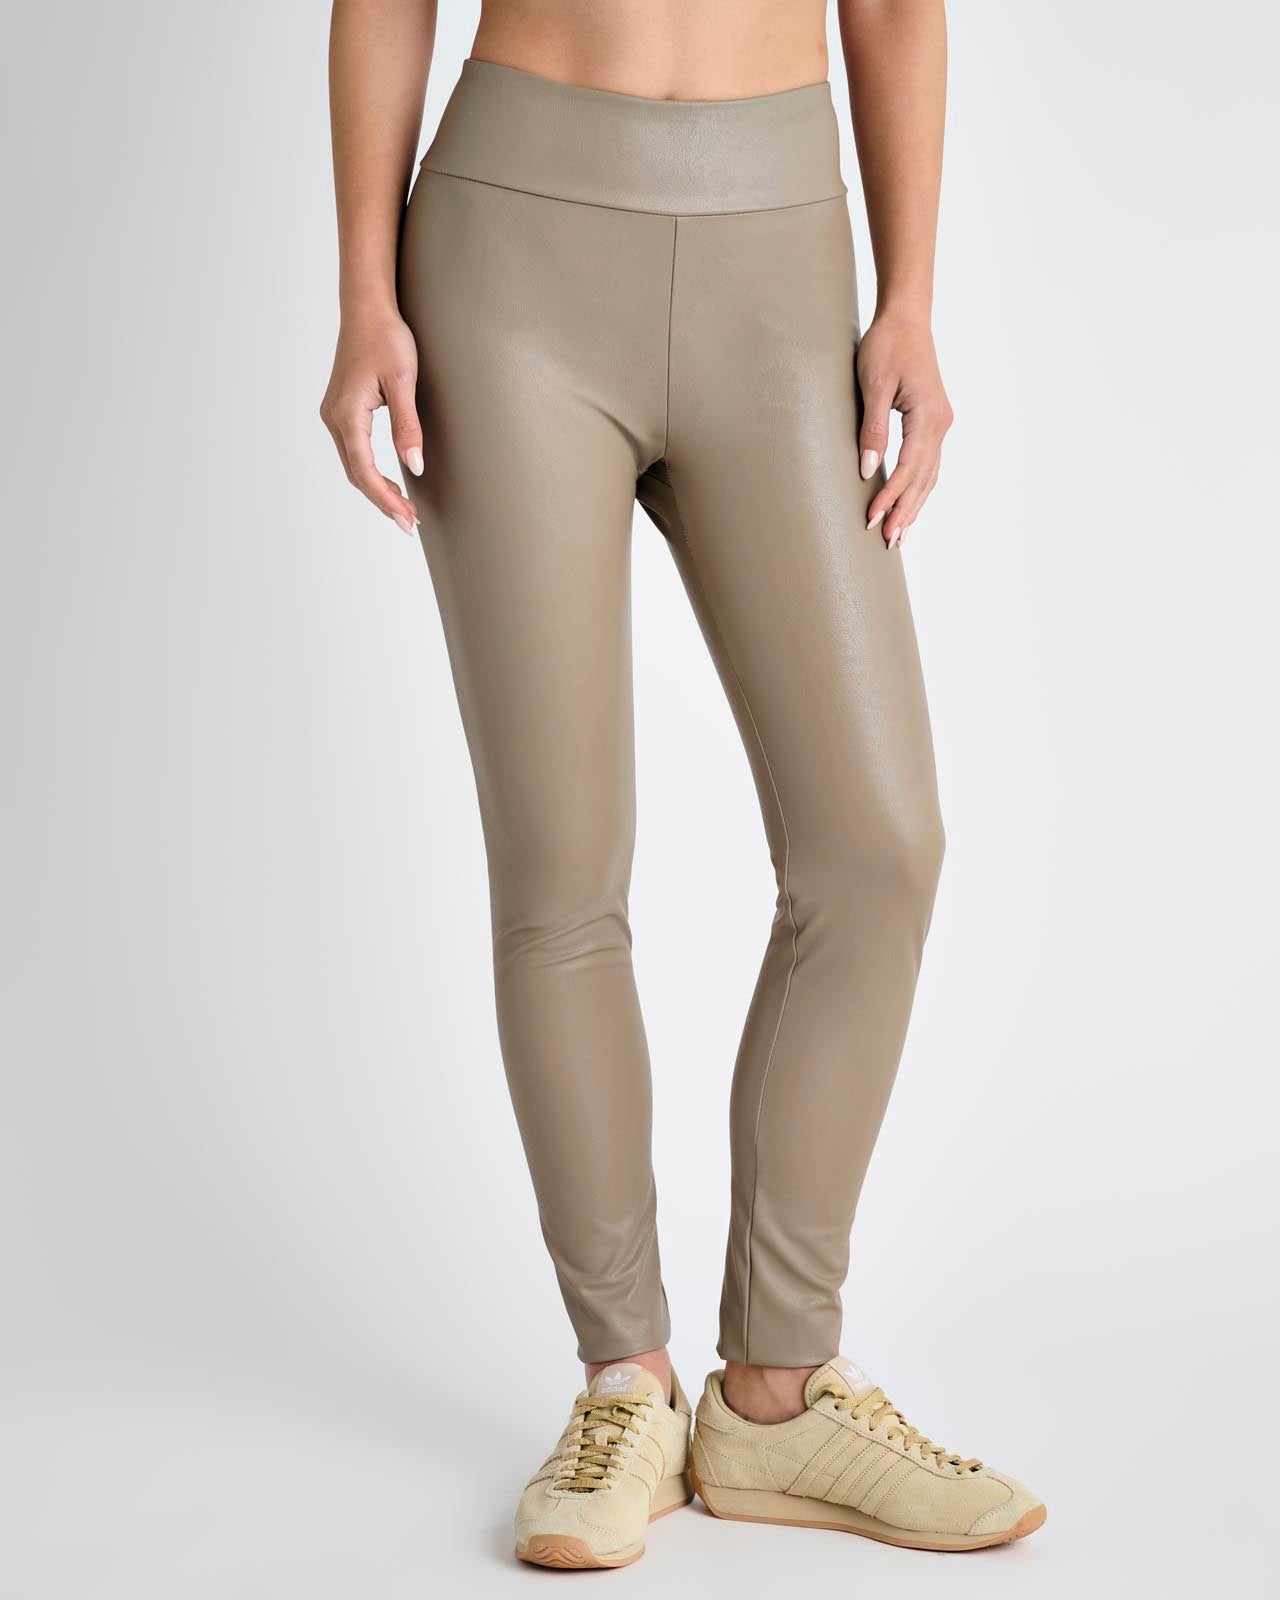 Leather Look Leggings With Gold Buttons Beige High Waisted Vegan Friendly –